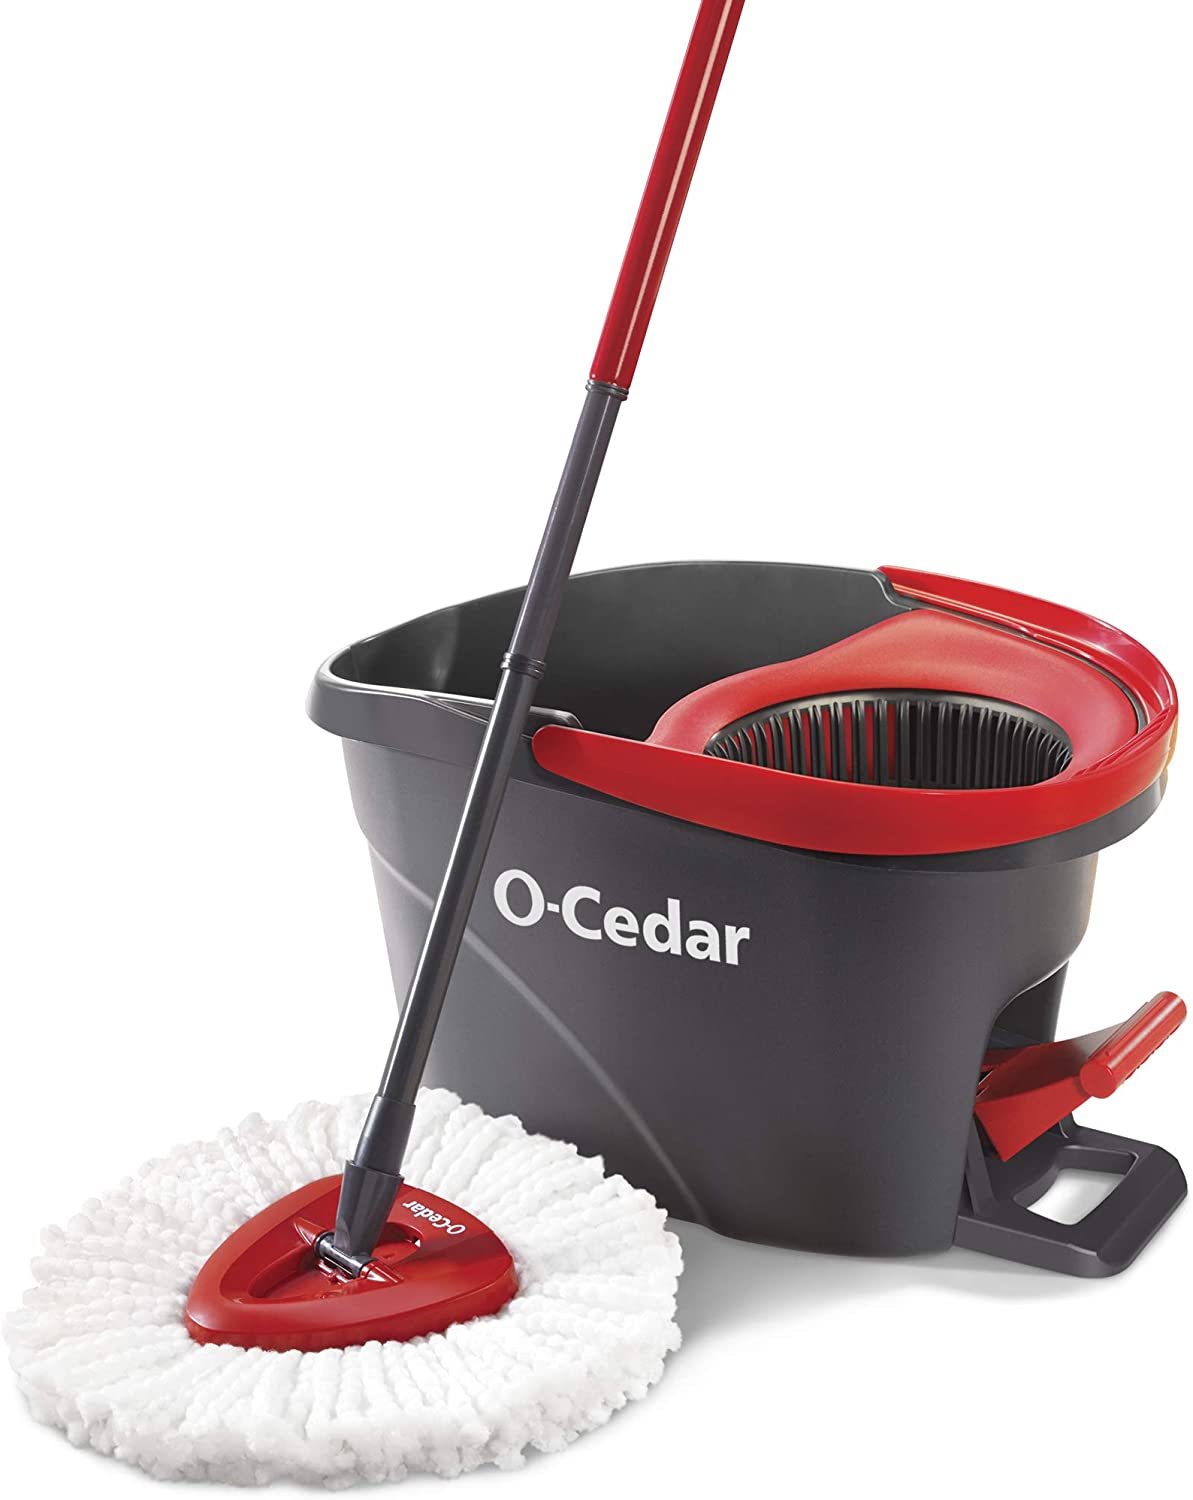 O-Cedar EasyWring Microfiber Spin Mop, Bucket Floor Cleaning System, Red, Gray 13